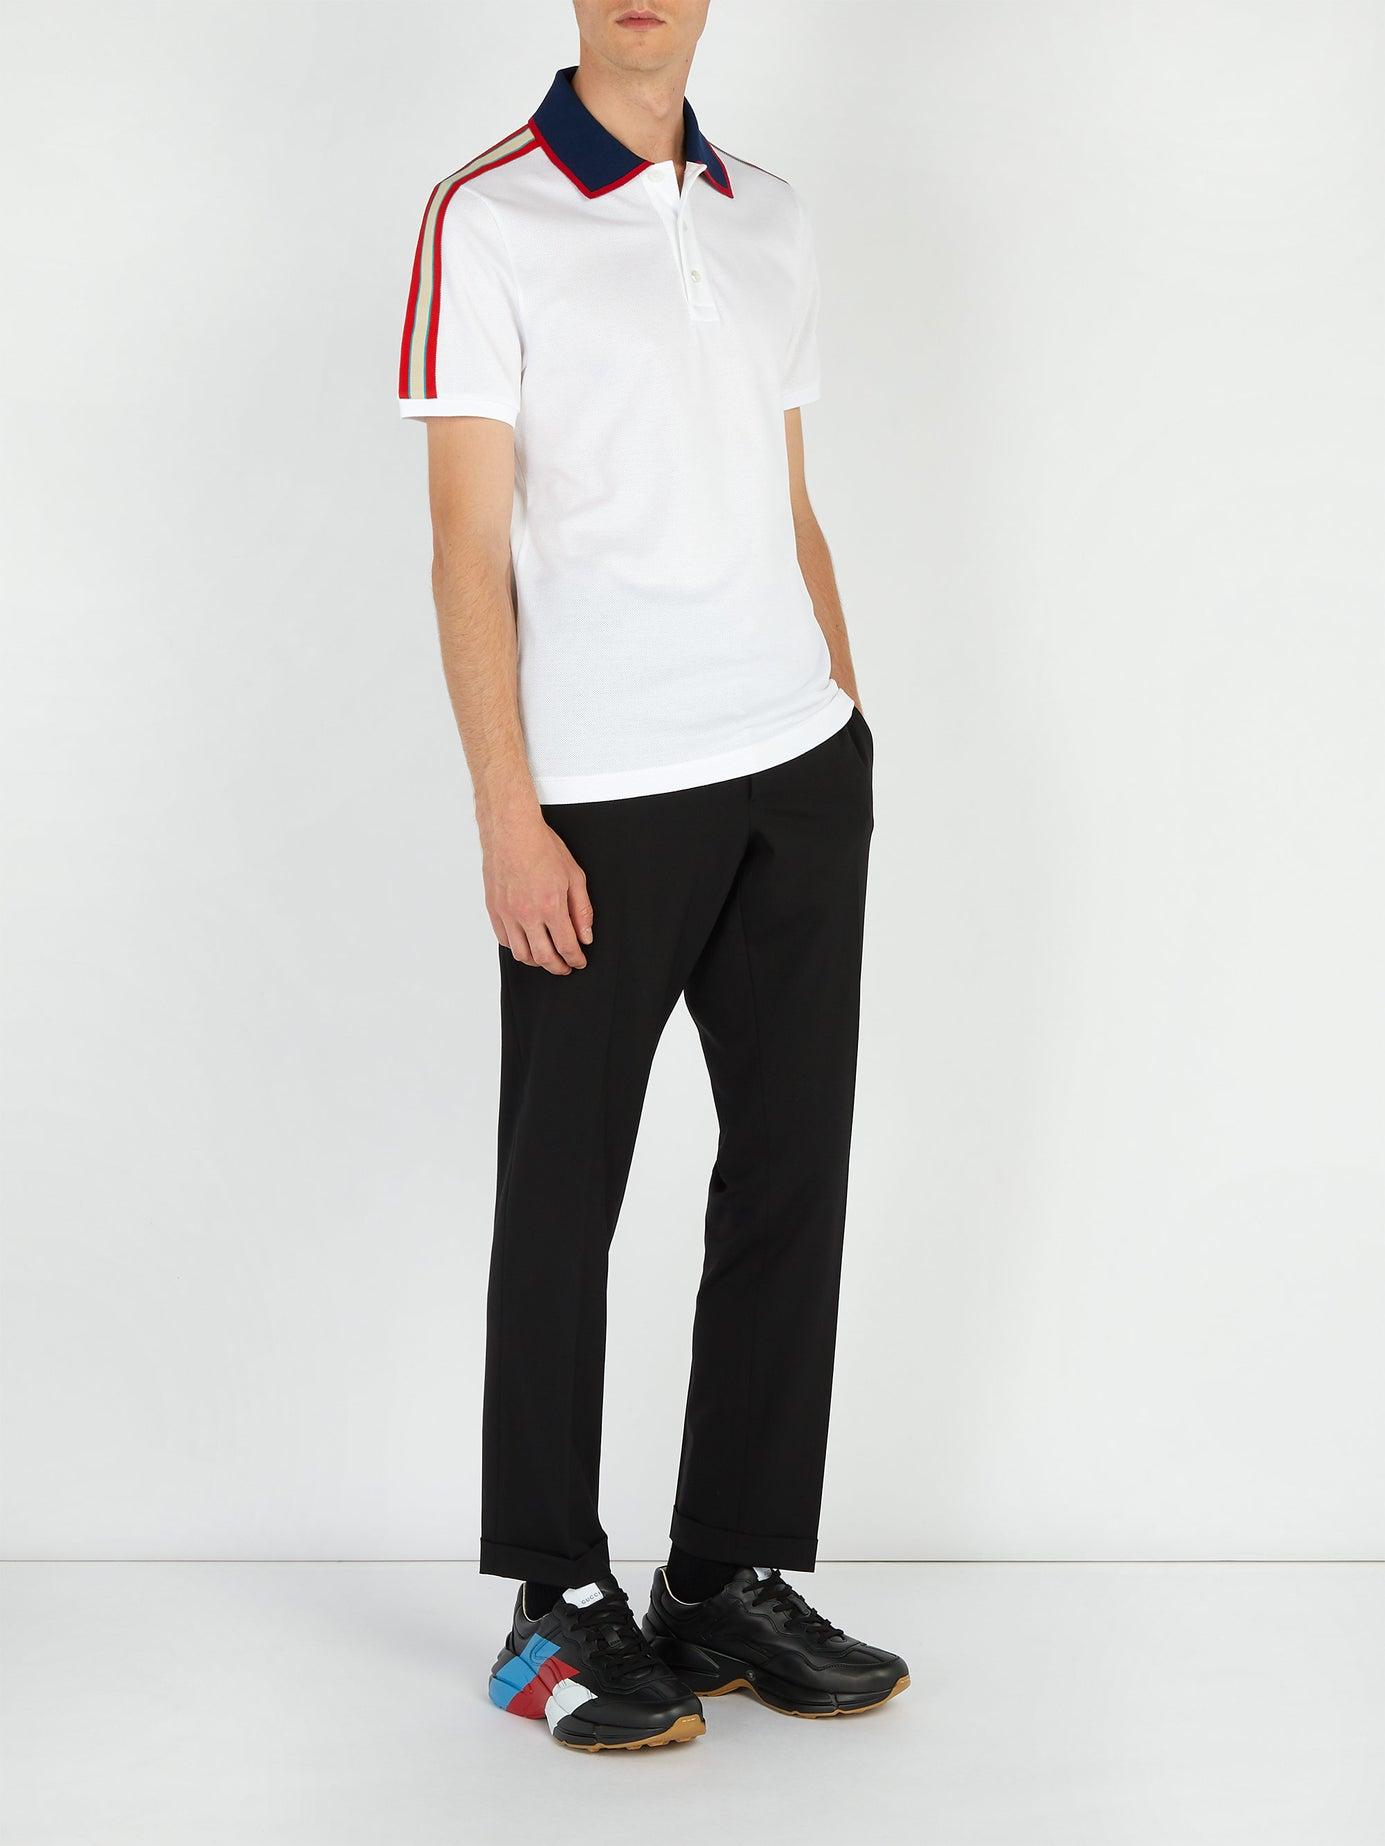 Gucci Cotton-piqué Polo Shirt in White for Men - Save 2% - Lyst